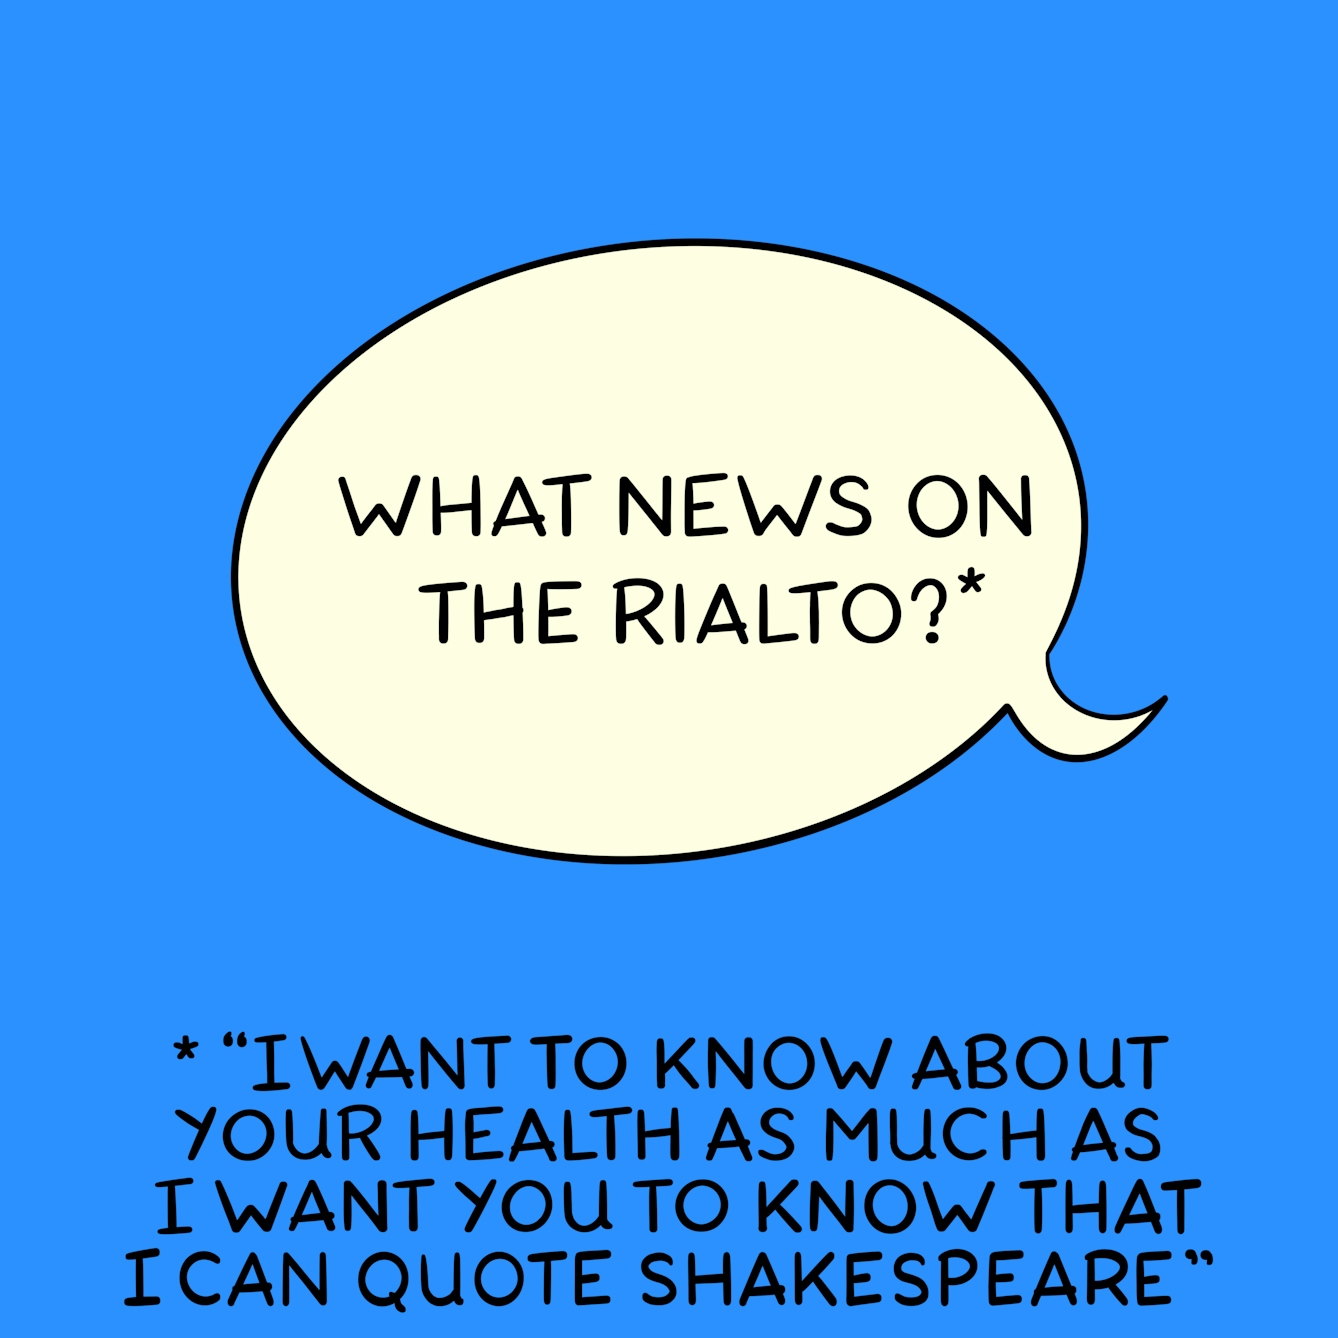 Panel 4 of a six-panel comic drawn digitally: Speech bubble reads "WWhat news on the Rialto*". The asterisk below says "I want to know about your health as much as I want you to know that I can quote Shakespeare"